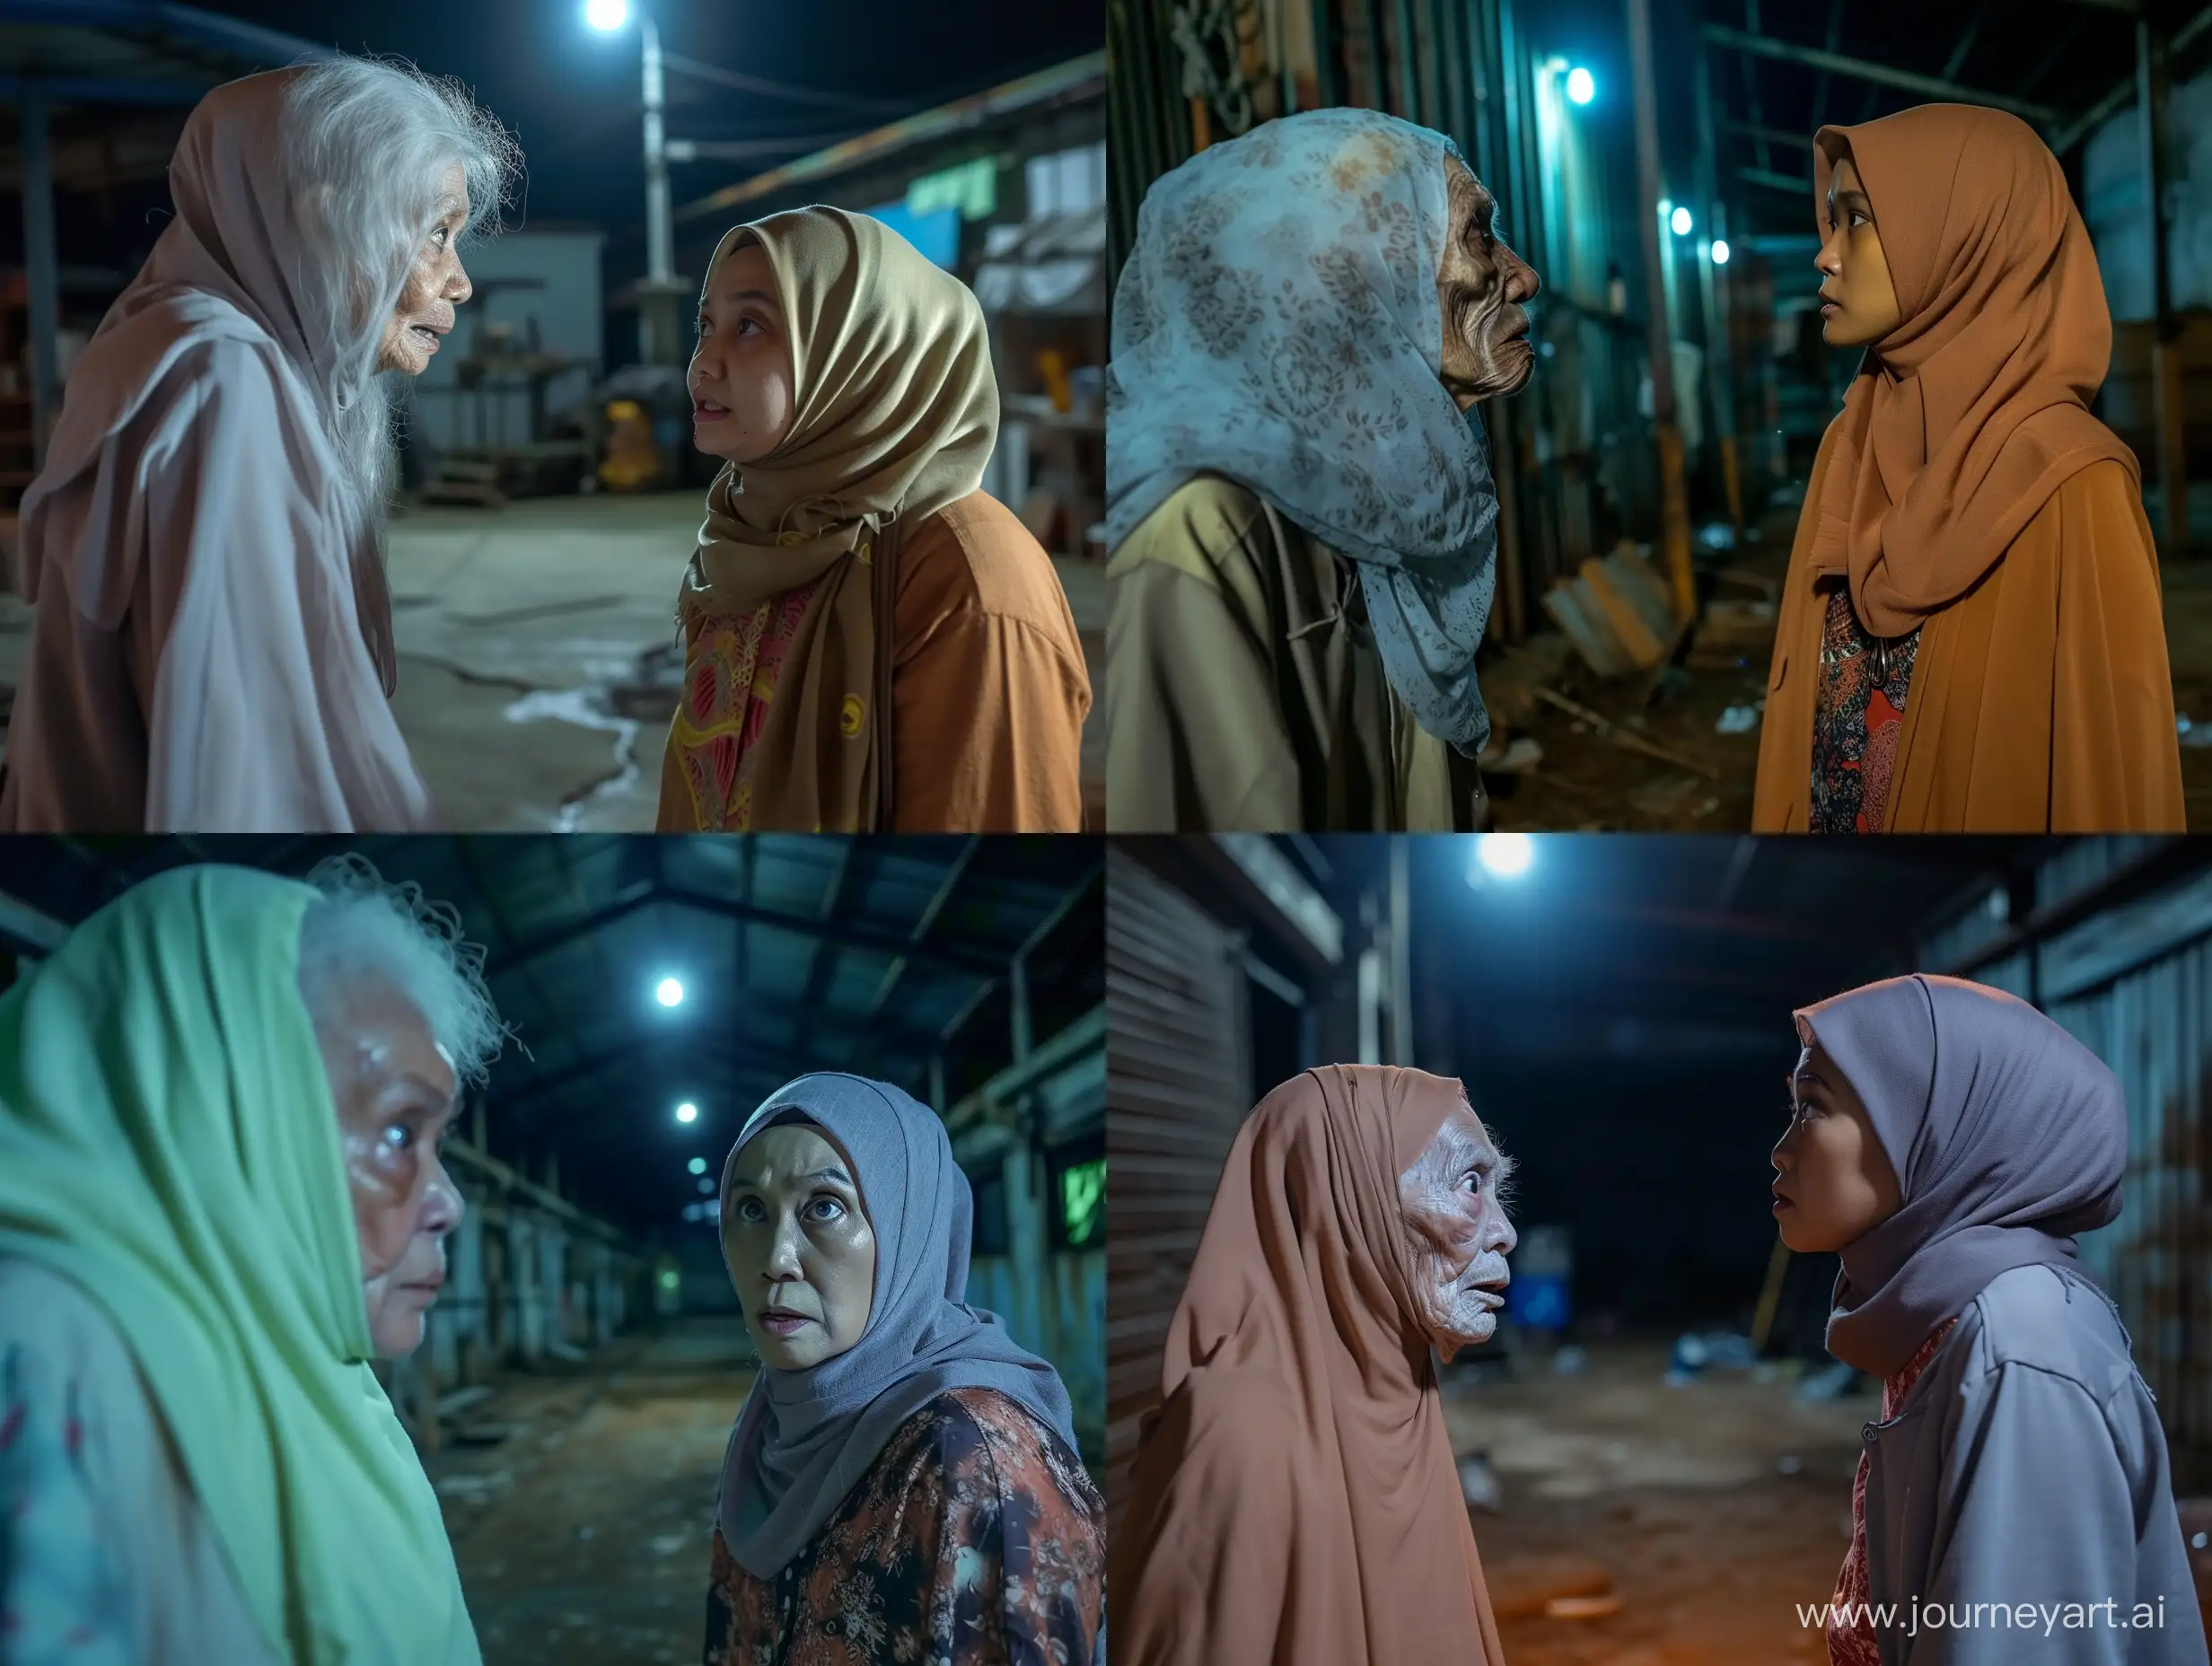 Ethereal-Encounter-Grandmothers-Ghost-and-HijabWearing-Woman-in-Abandoned-Warehouse